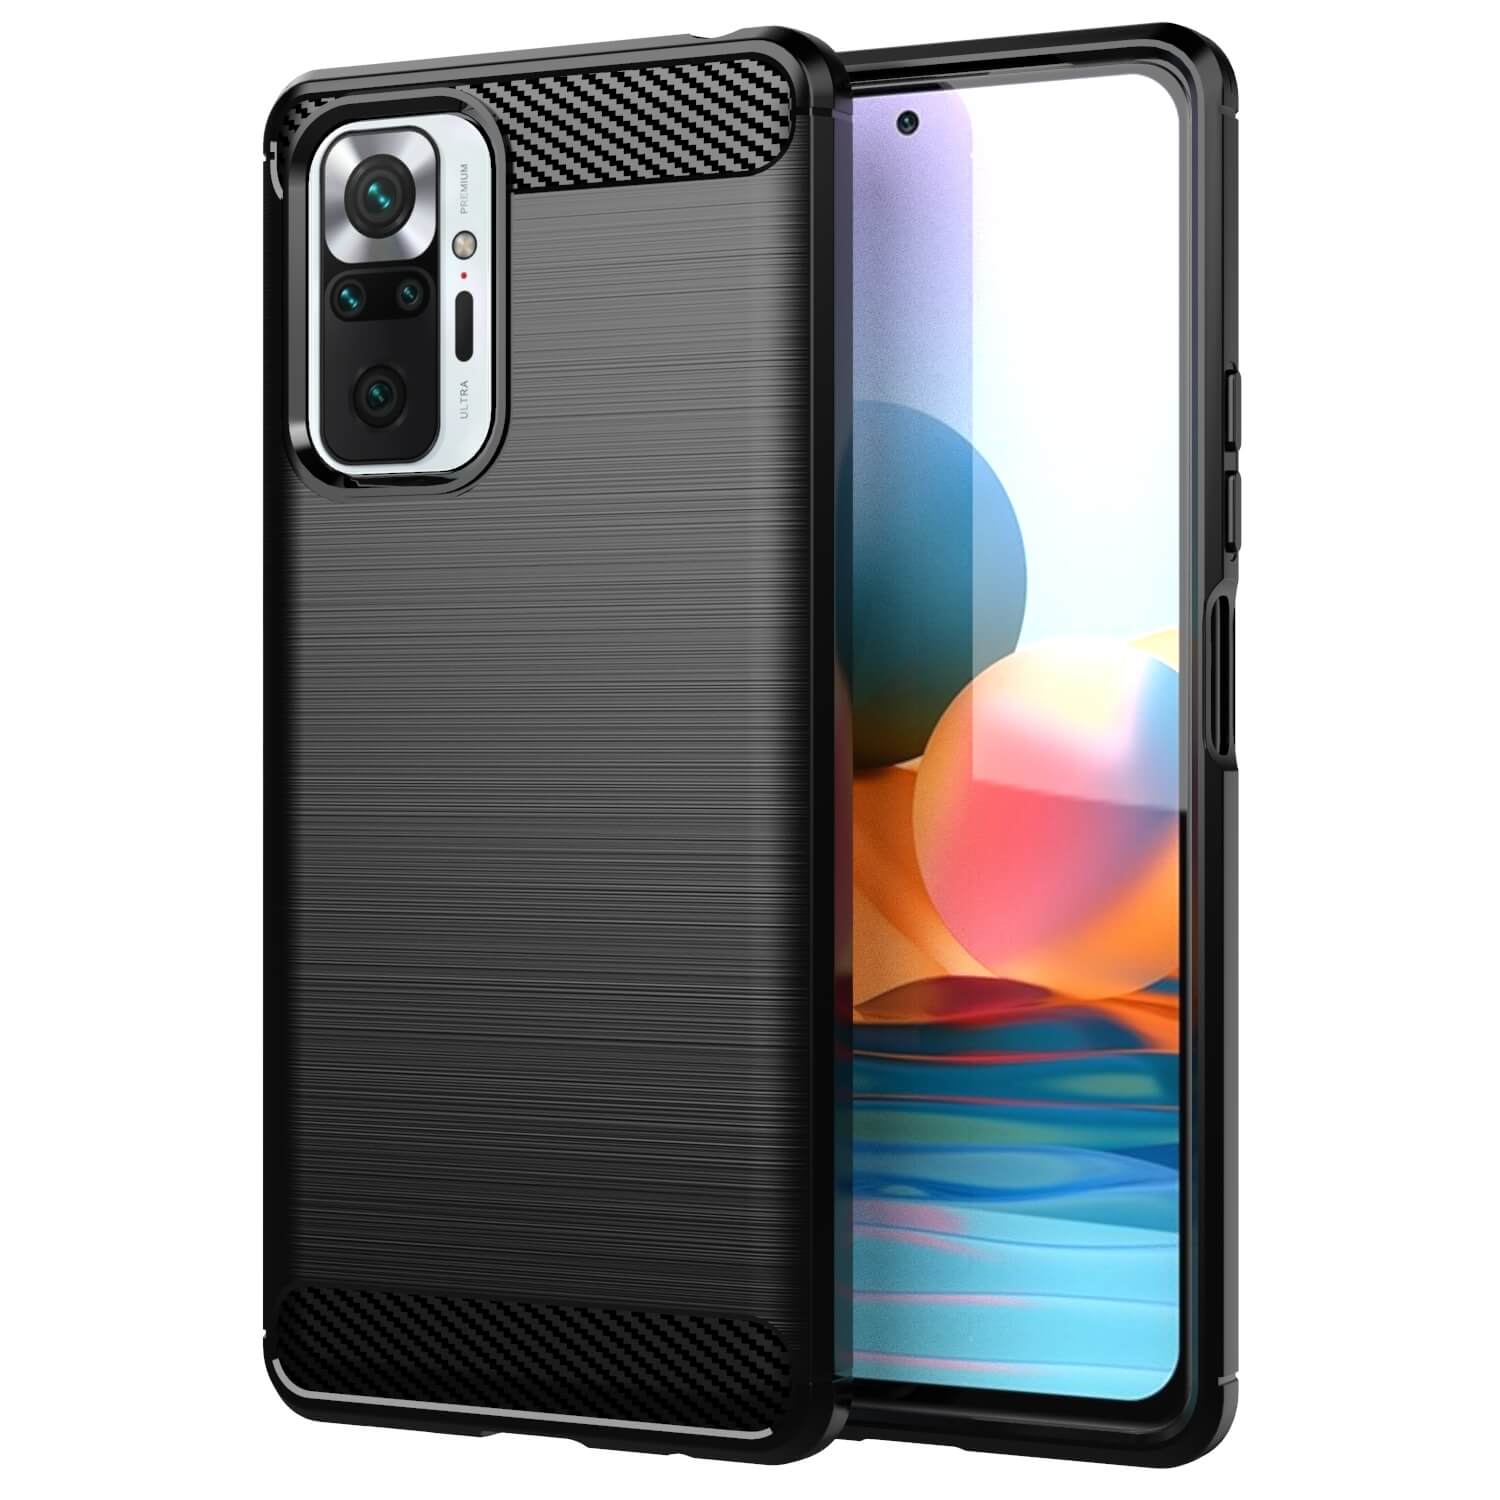 SDTEK Carbon Case for Xiaomi Redmi Note 10 Pro Phone Cover and Glass